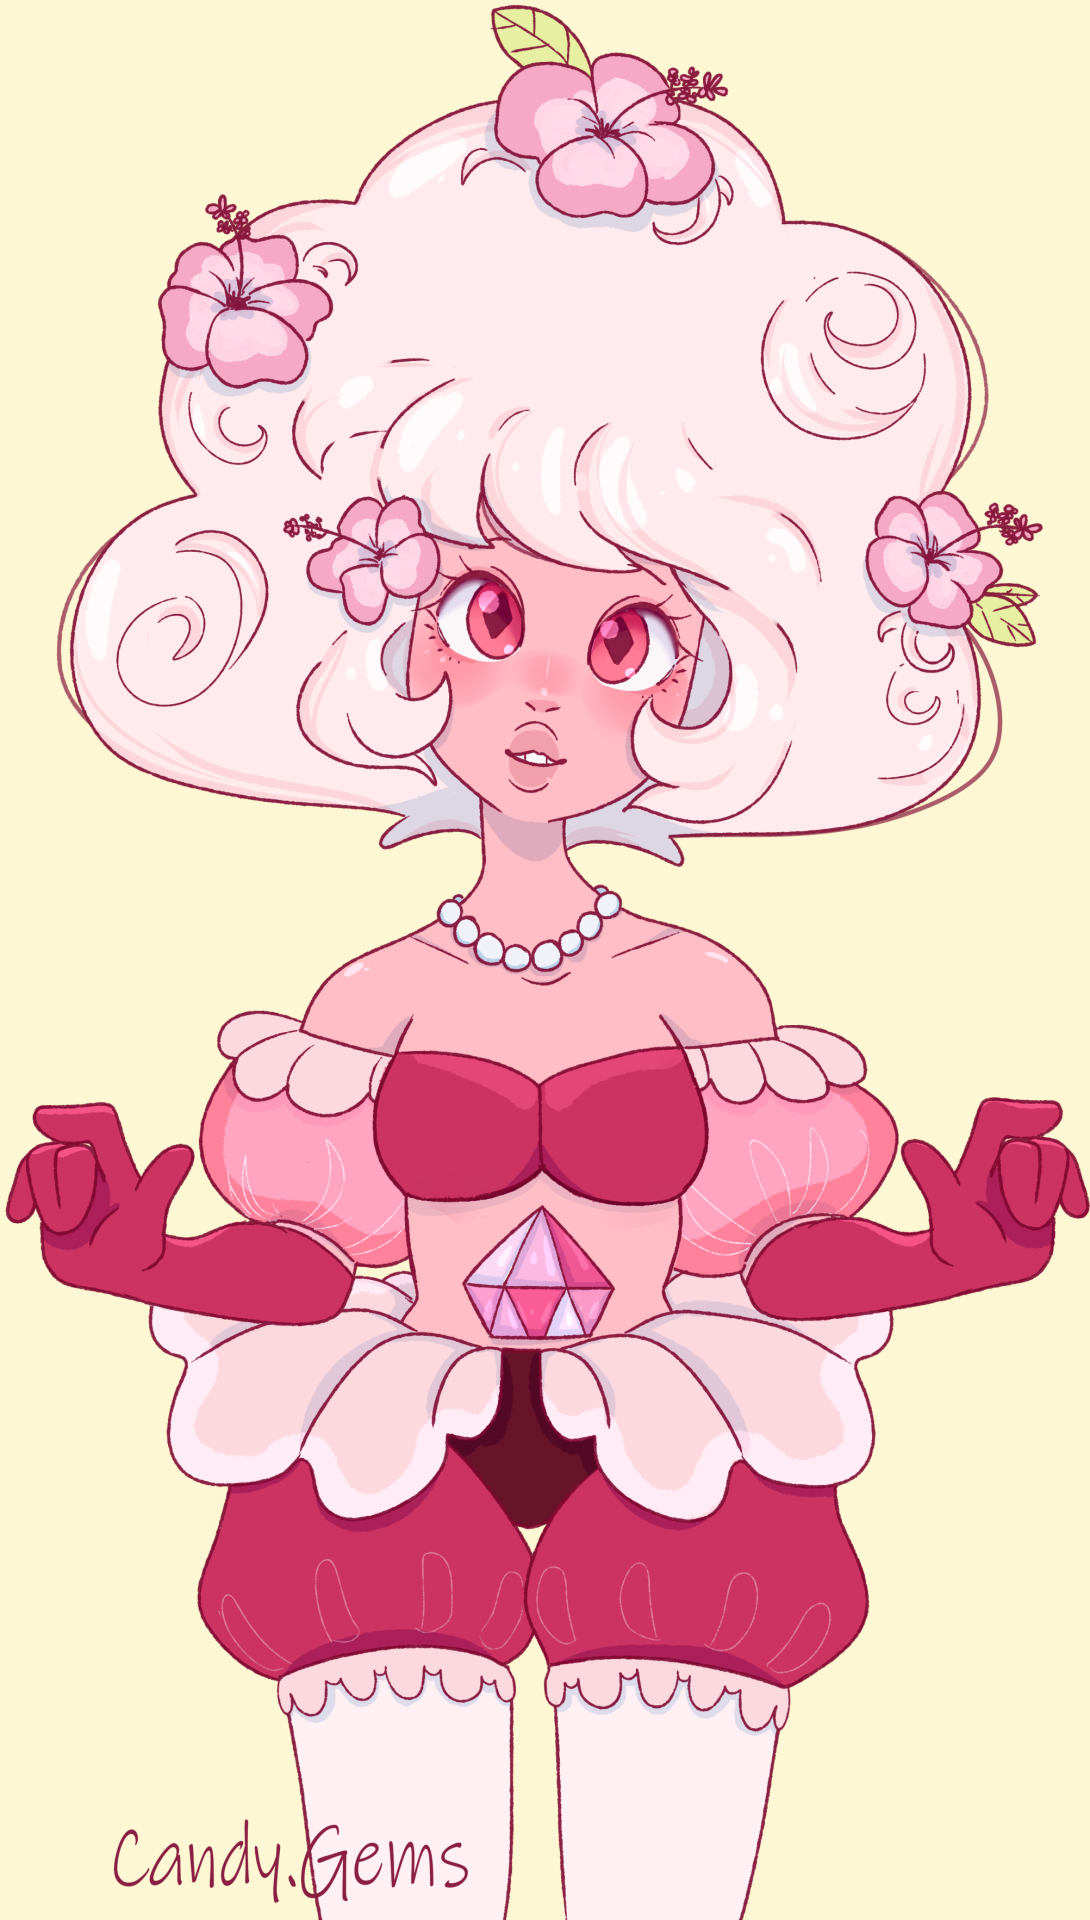 Got inspired by some fancy pink diamonds and decided to give it a shot💖💖